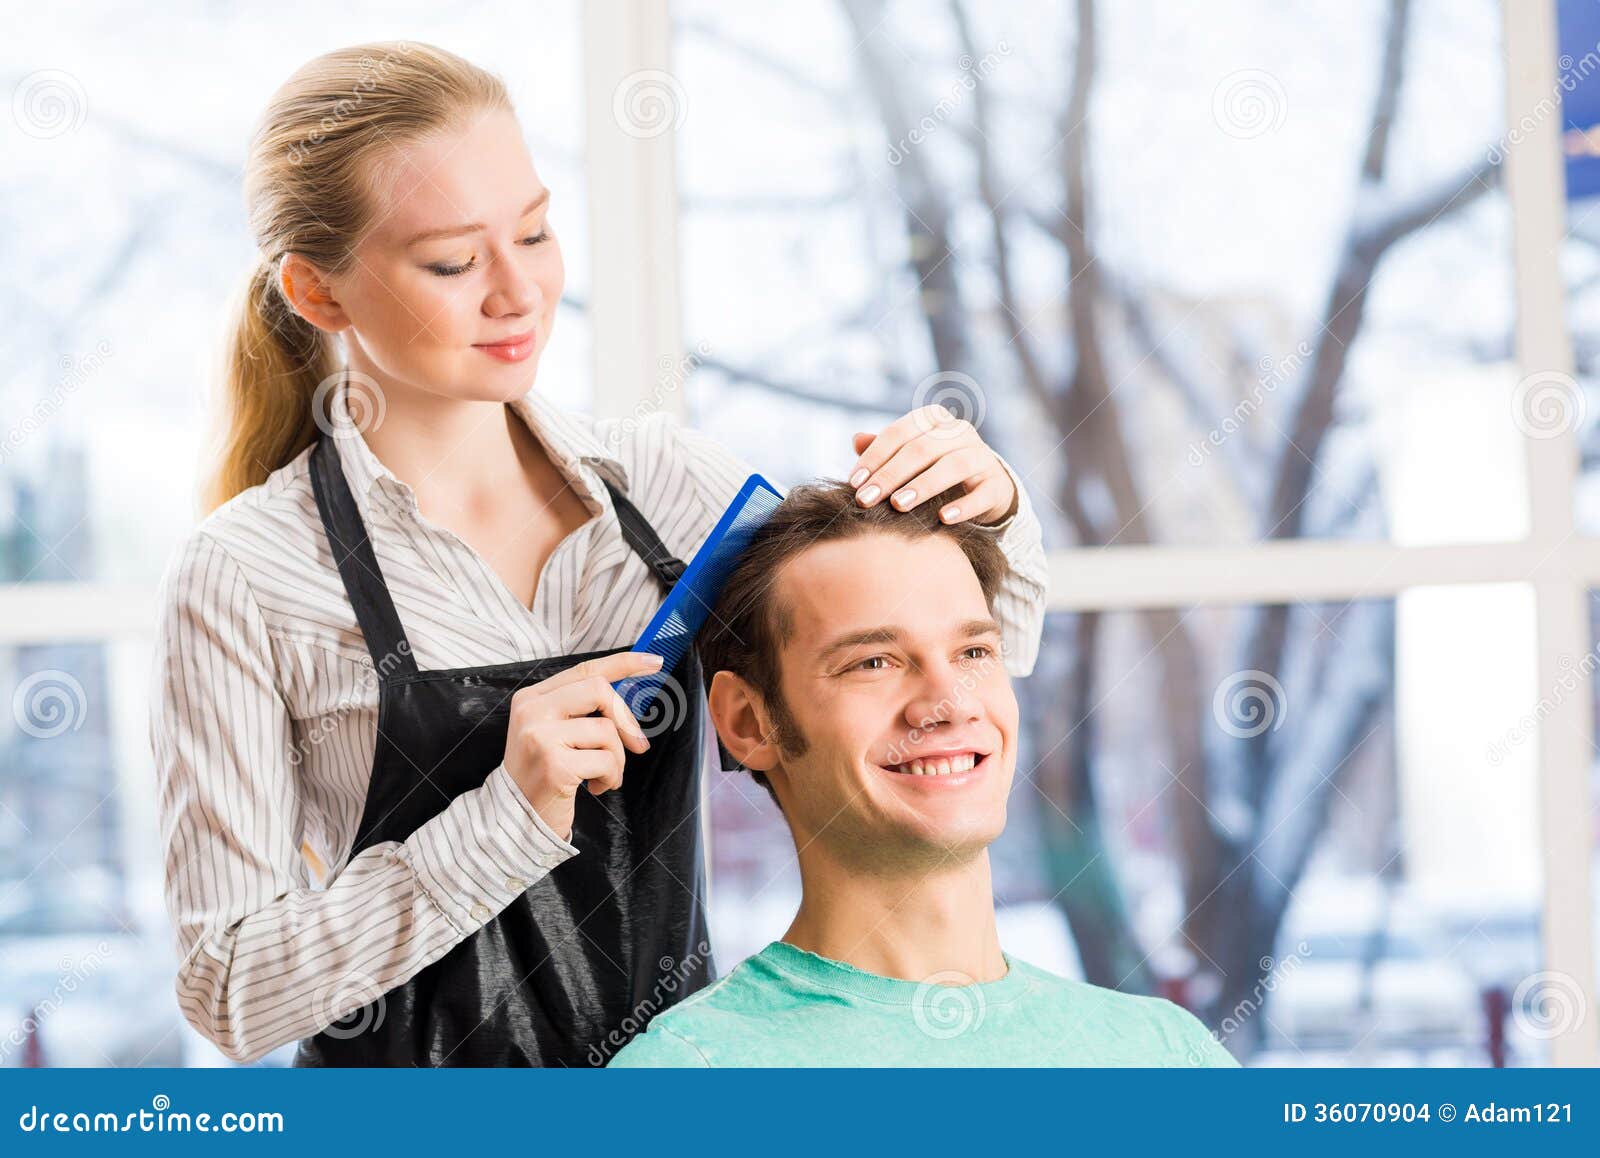 Hairdresser and client stock photo. Image of fingers - 36070904